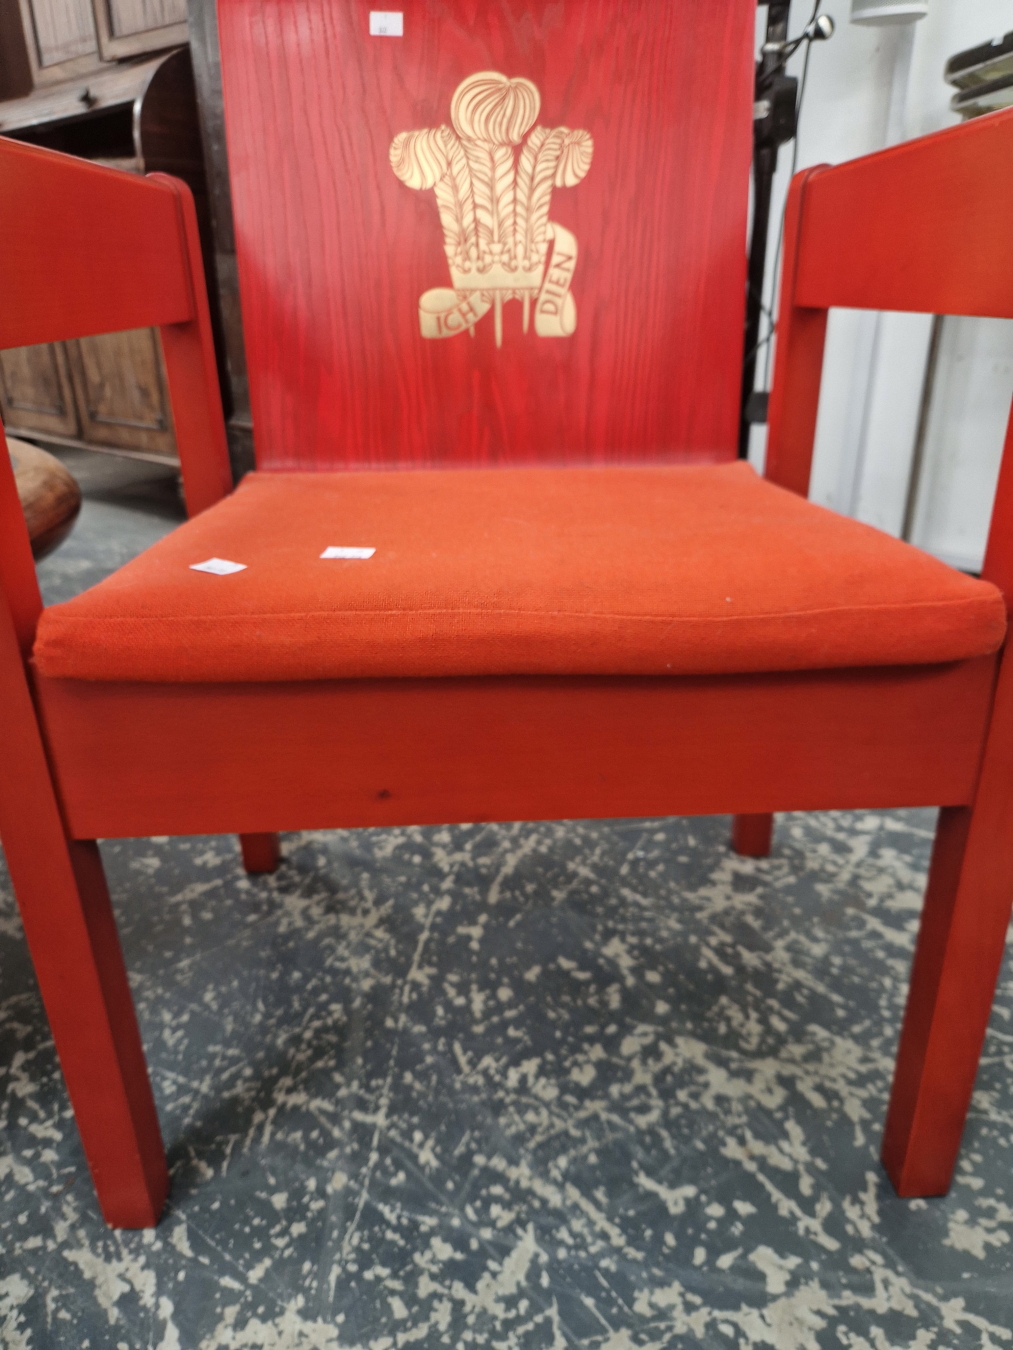 A 1969 PRINCE OF WALES INVESTITURE CHAIR - Image 3 of 3